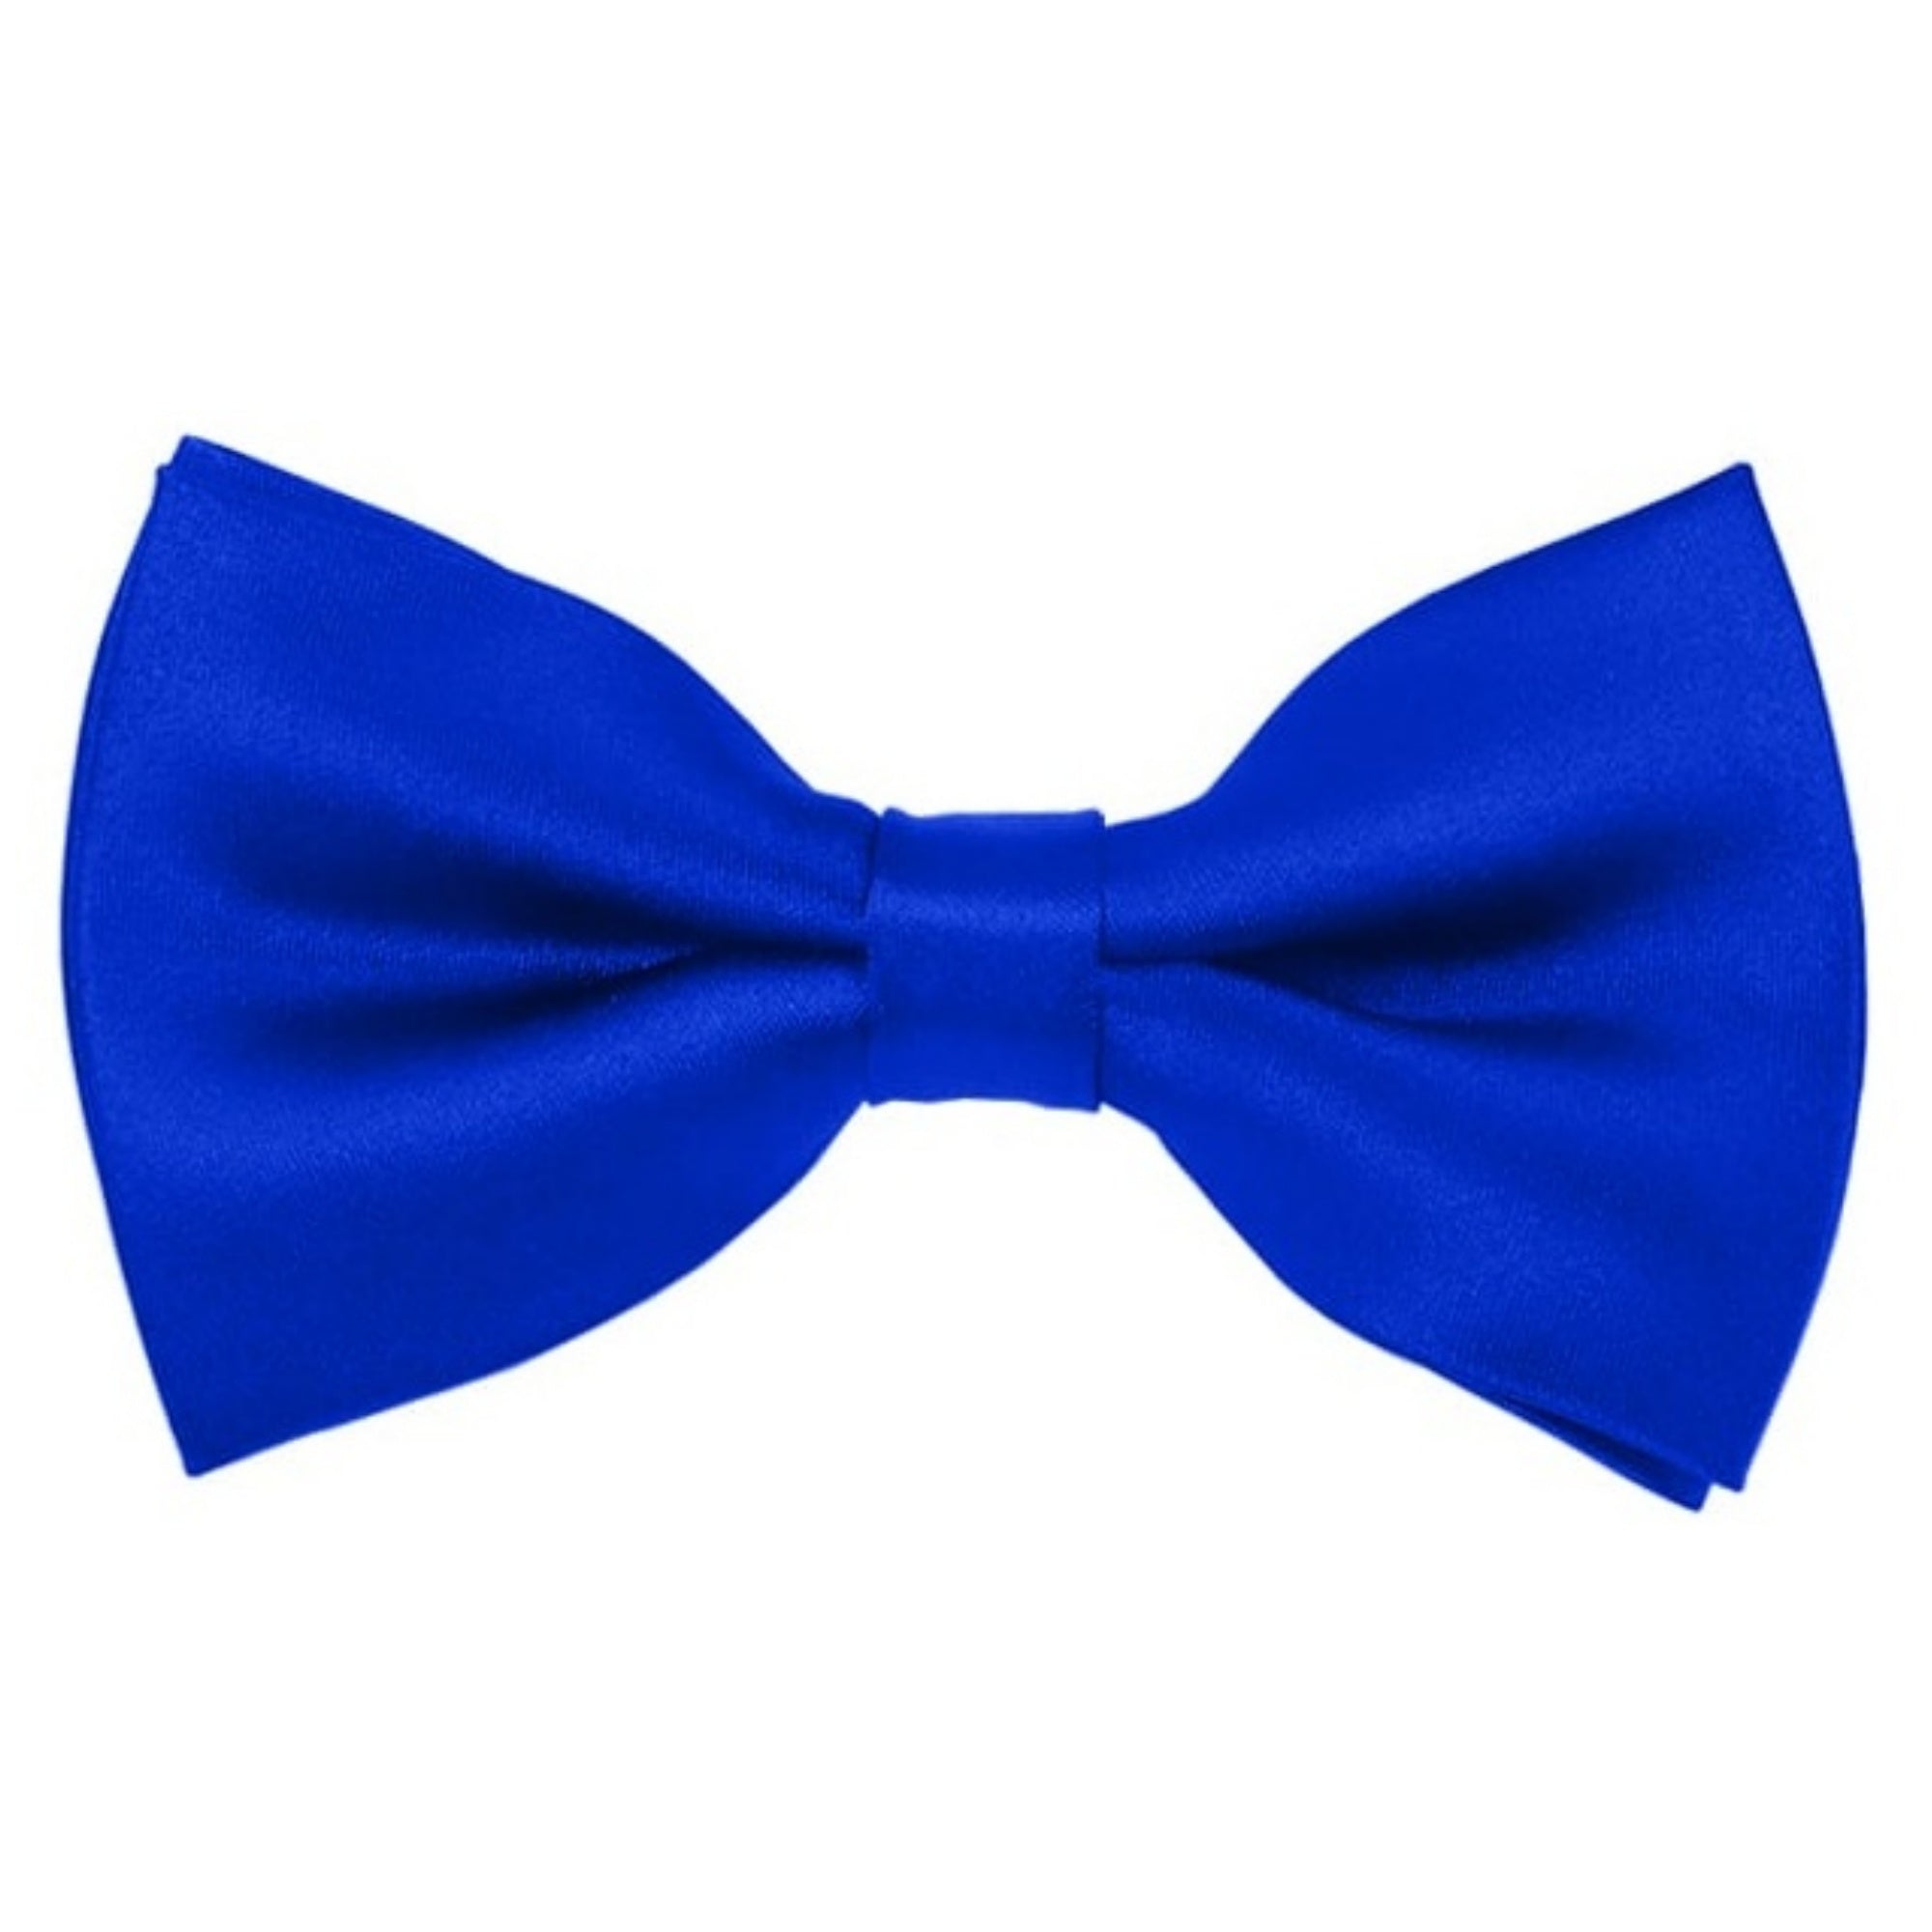 TheDapperTie Men's Solid Color 2.5 W And 4.5 L Inch Pre-Tied adjustable Bow Ties Men's Solid Color Bow Tie TheDapperTie Royal Blue  